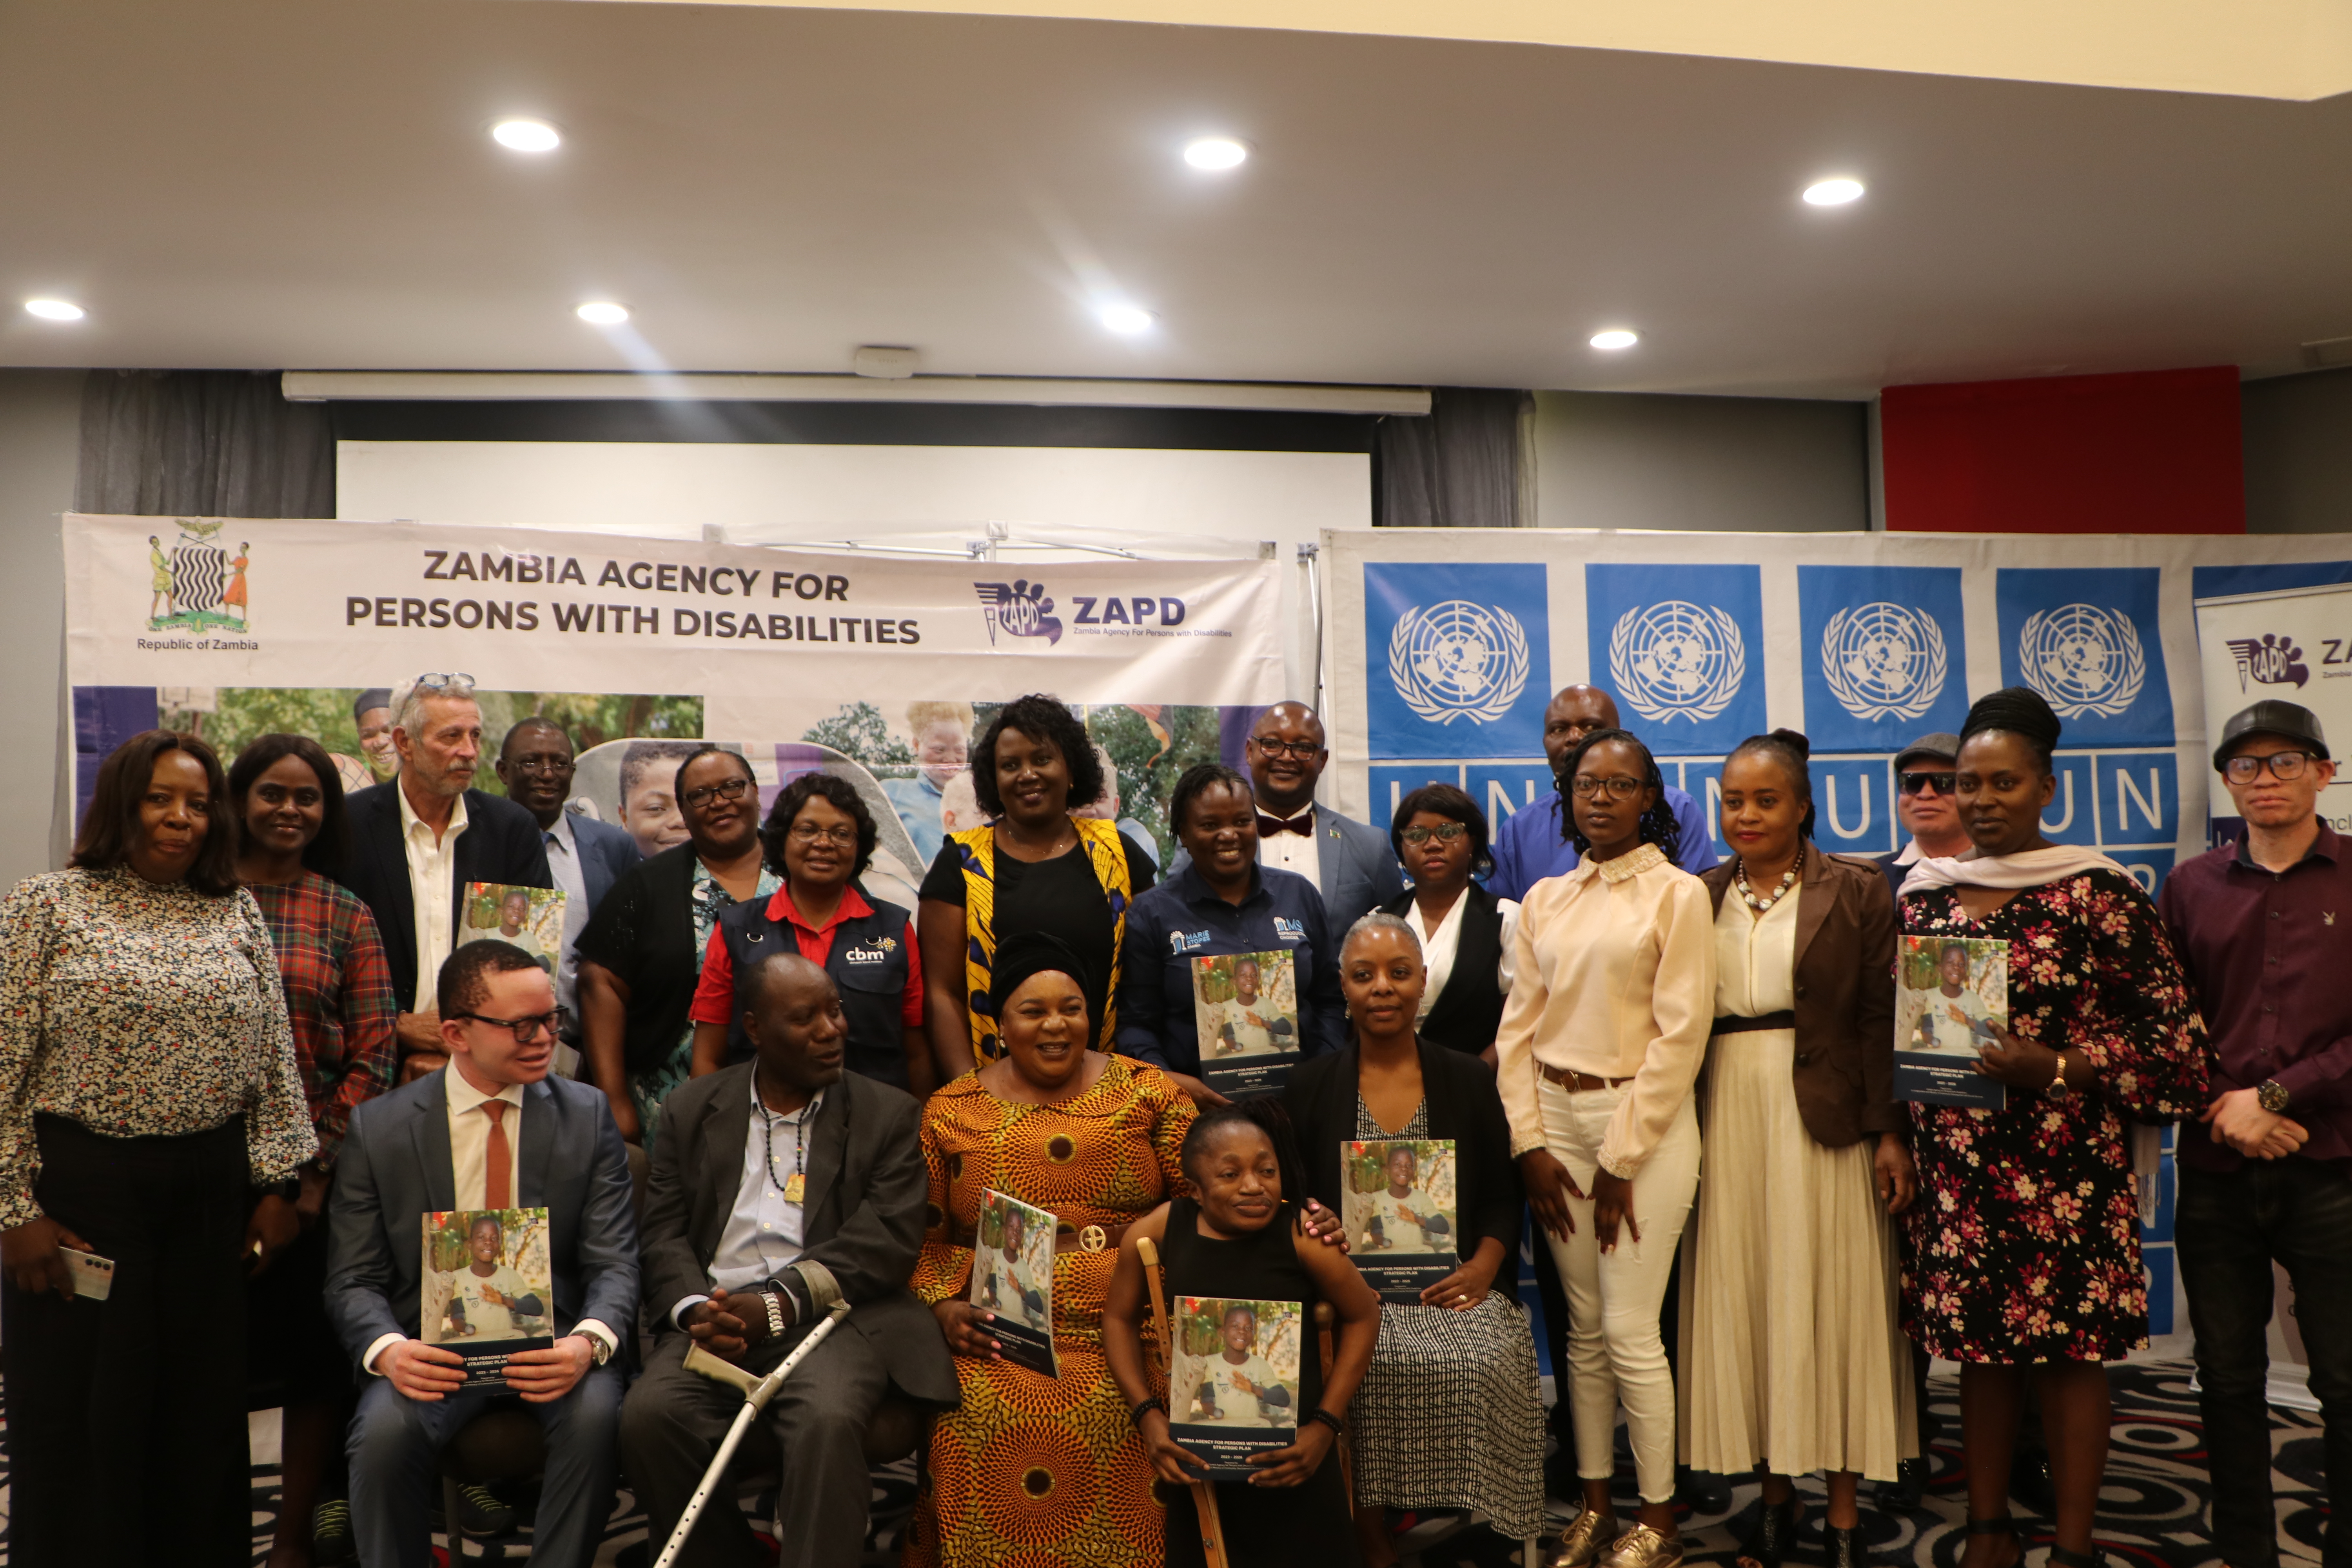 Image of the Minister of Community Development and Social Services and the Director General of ZAPD, joined by the UNDP and key partners at the Launch of the ZAPD Strategic Plan. They are all holding the strategic plan